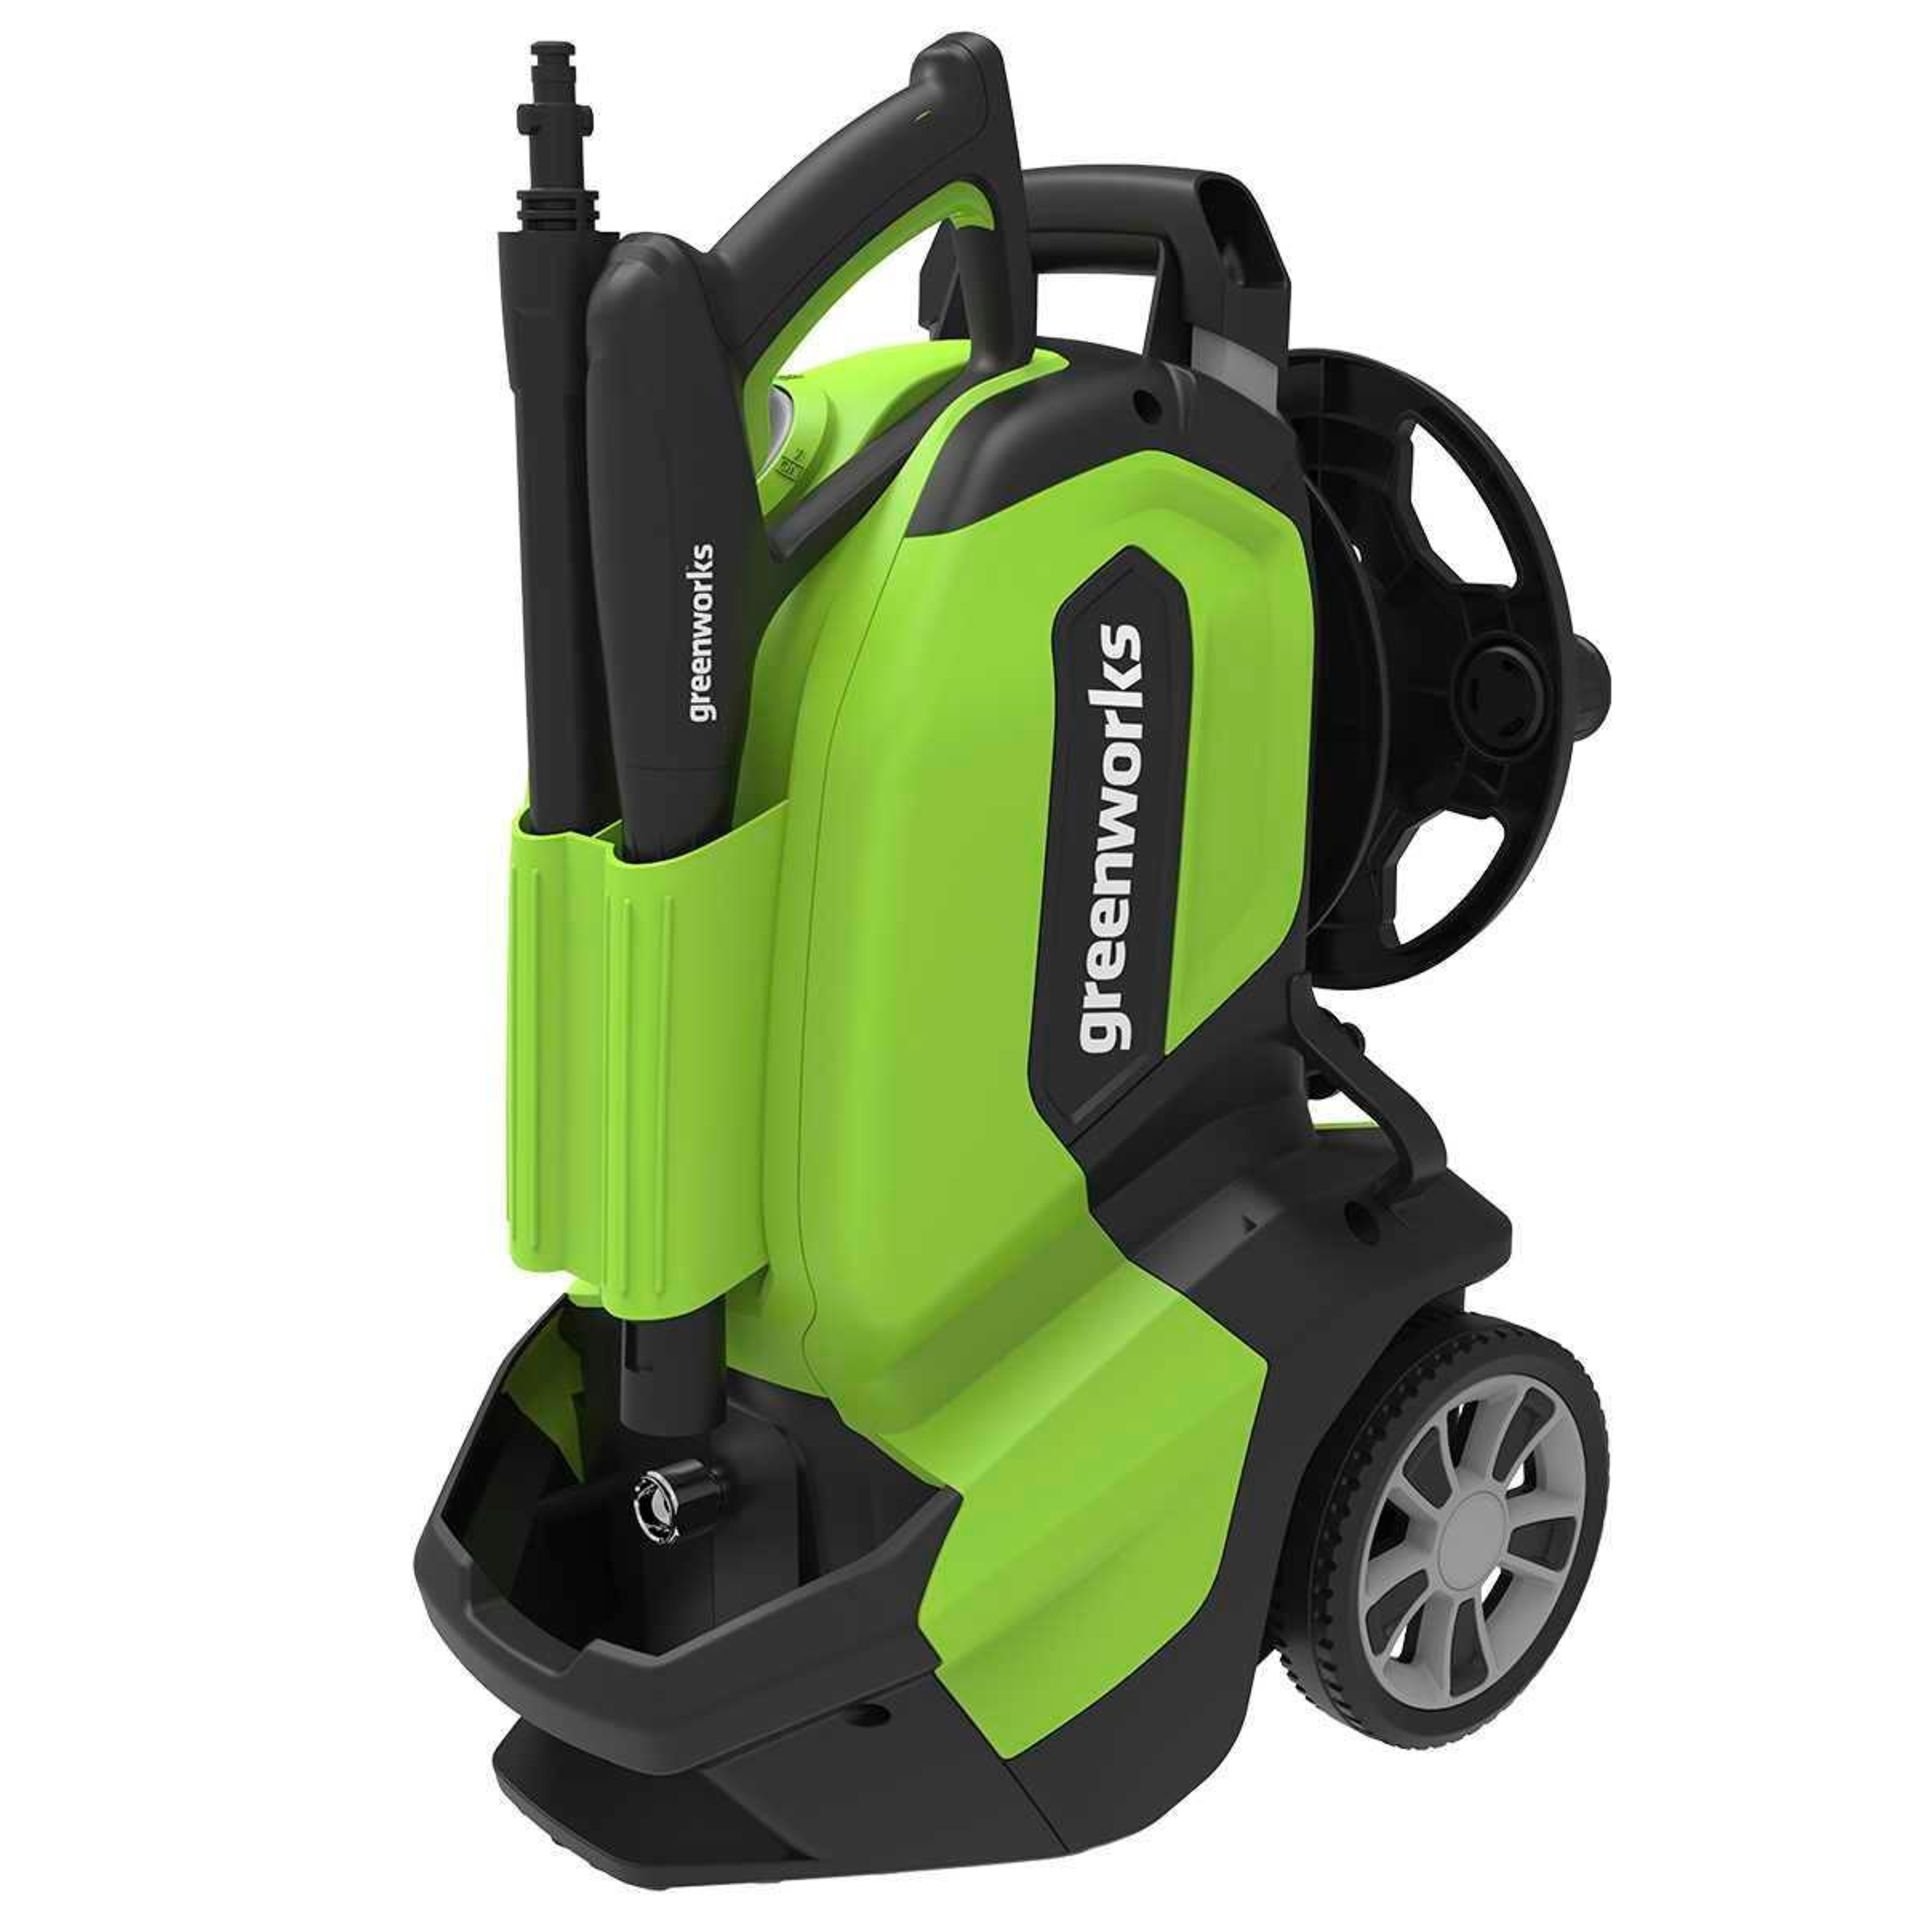 Rrp £180 Boxed Greenworks Electric Pressure Washer - Image 2 of 2